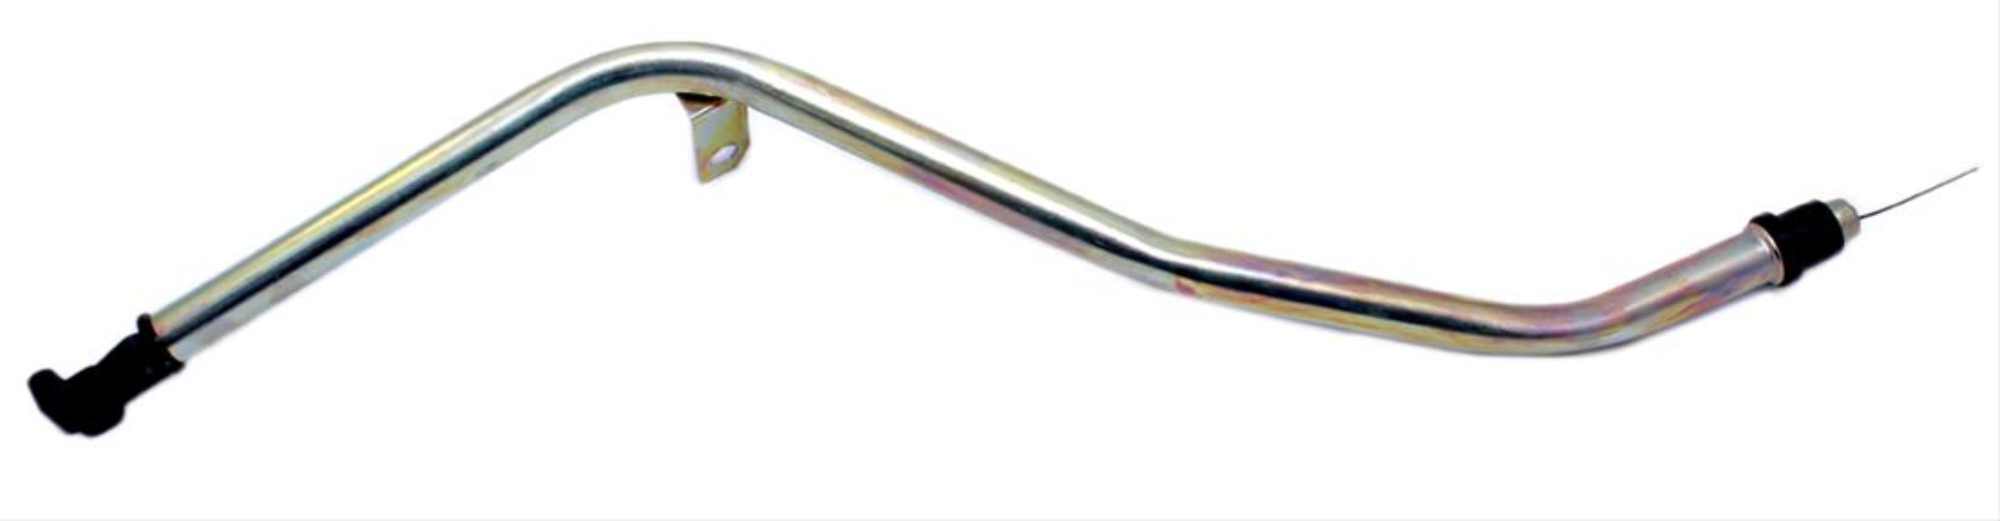 FTI Performance F2554 Transmission Dipstick, Solid Tube, Bellhousing Mount, Steel, Zinc Plated, Each